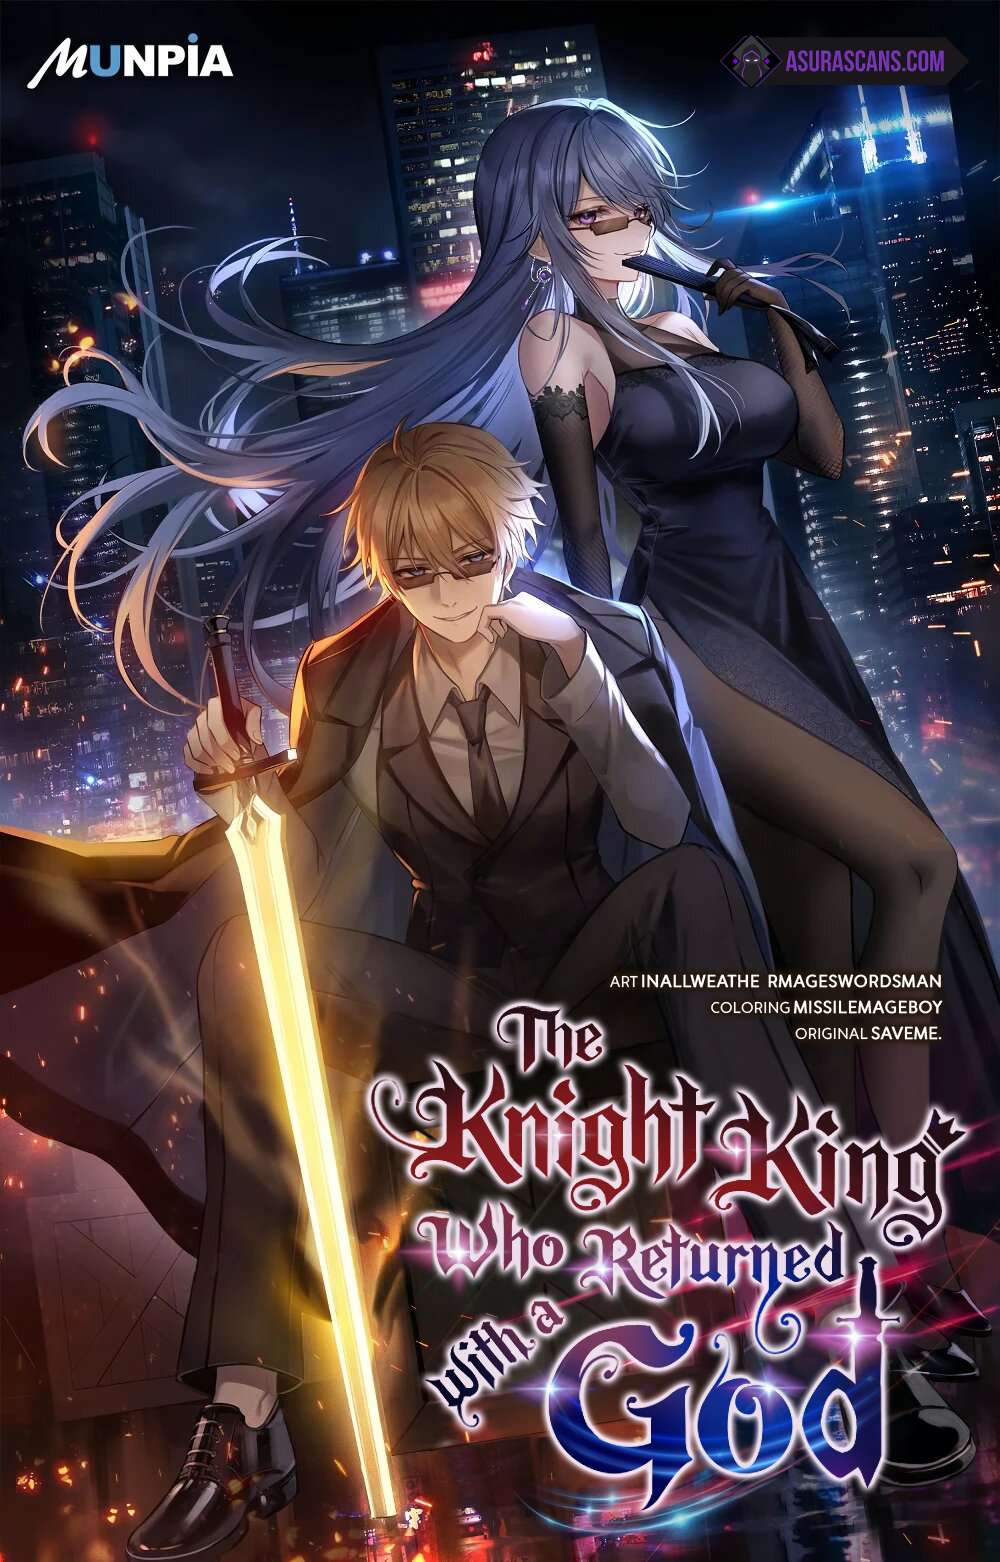 theknightkingCover01